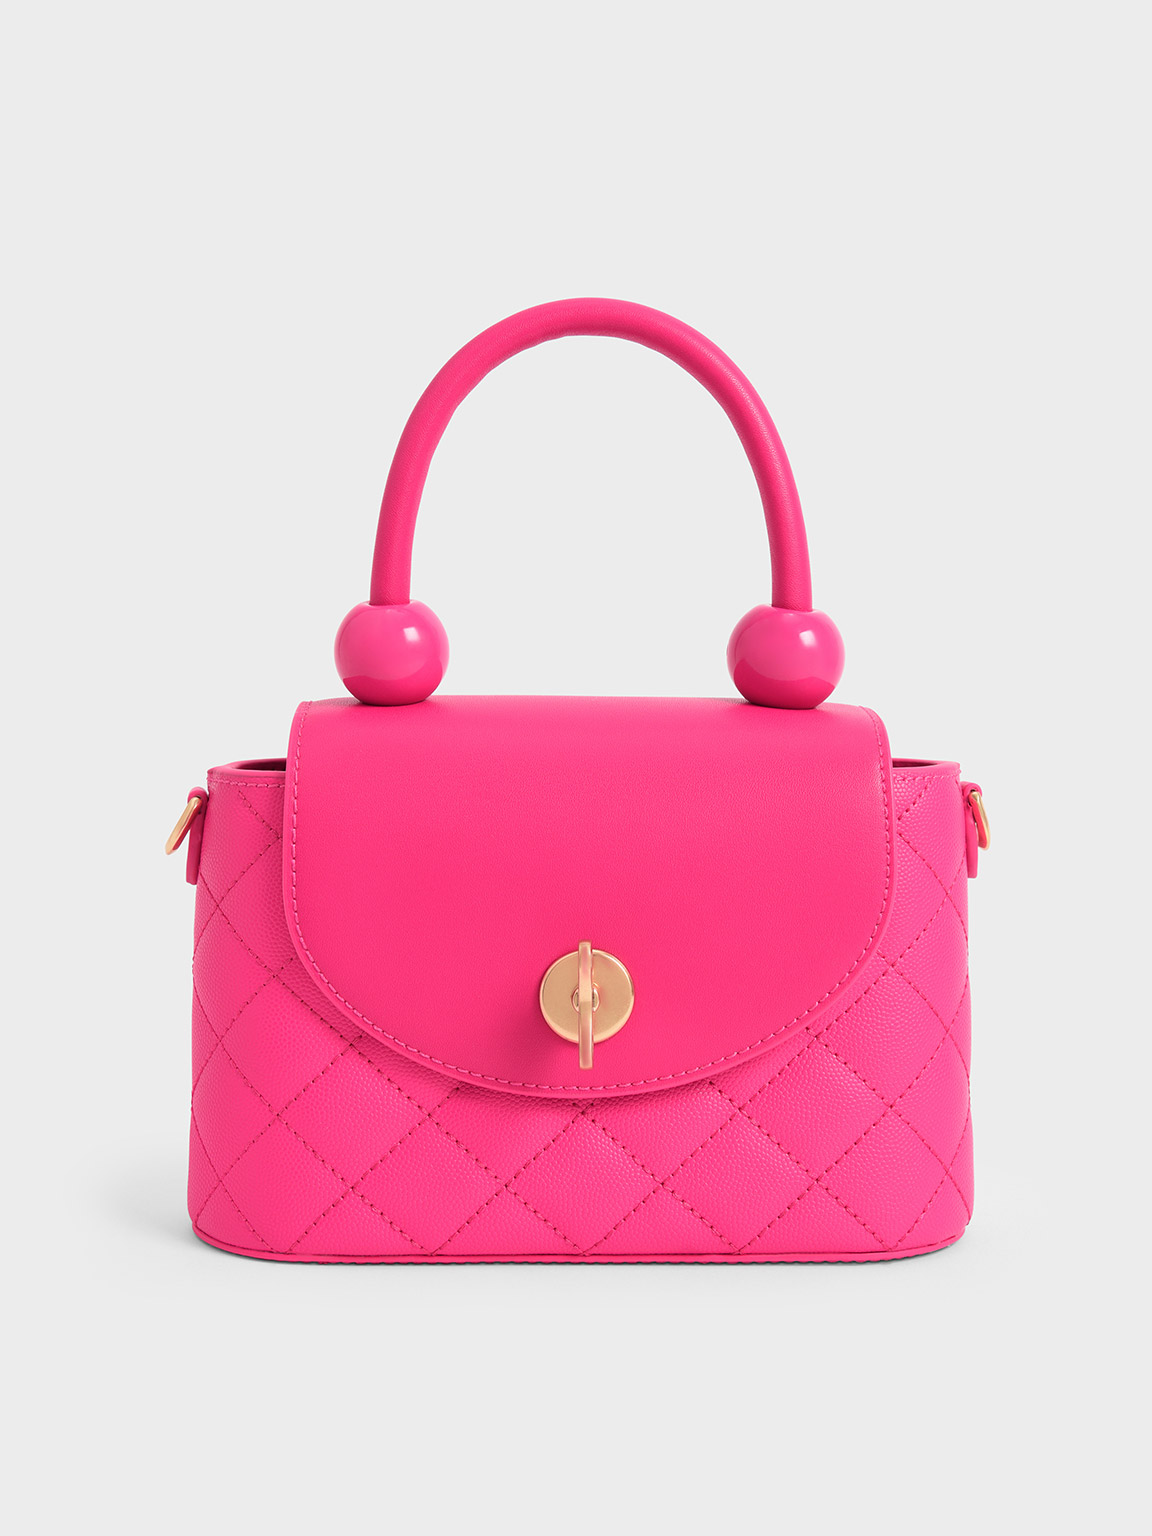 Charles & Keith - Women's Round Quilted Top Handle Bag, Fuchsia, S